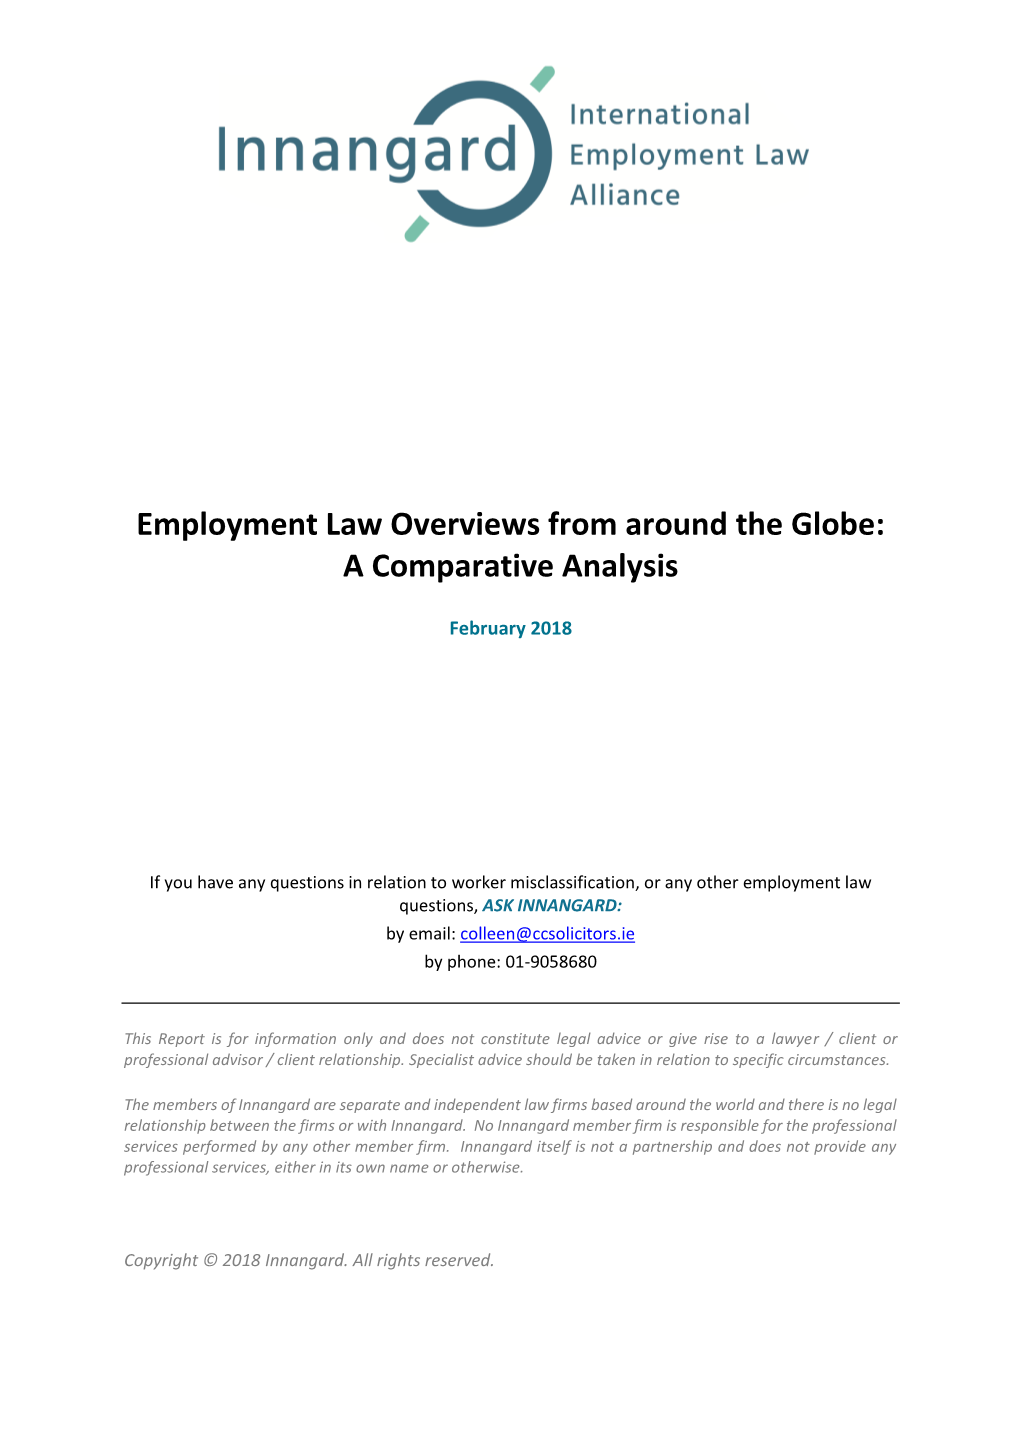 Employment Law Overviews from Around the Globe: a Comparative Analysis